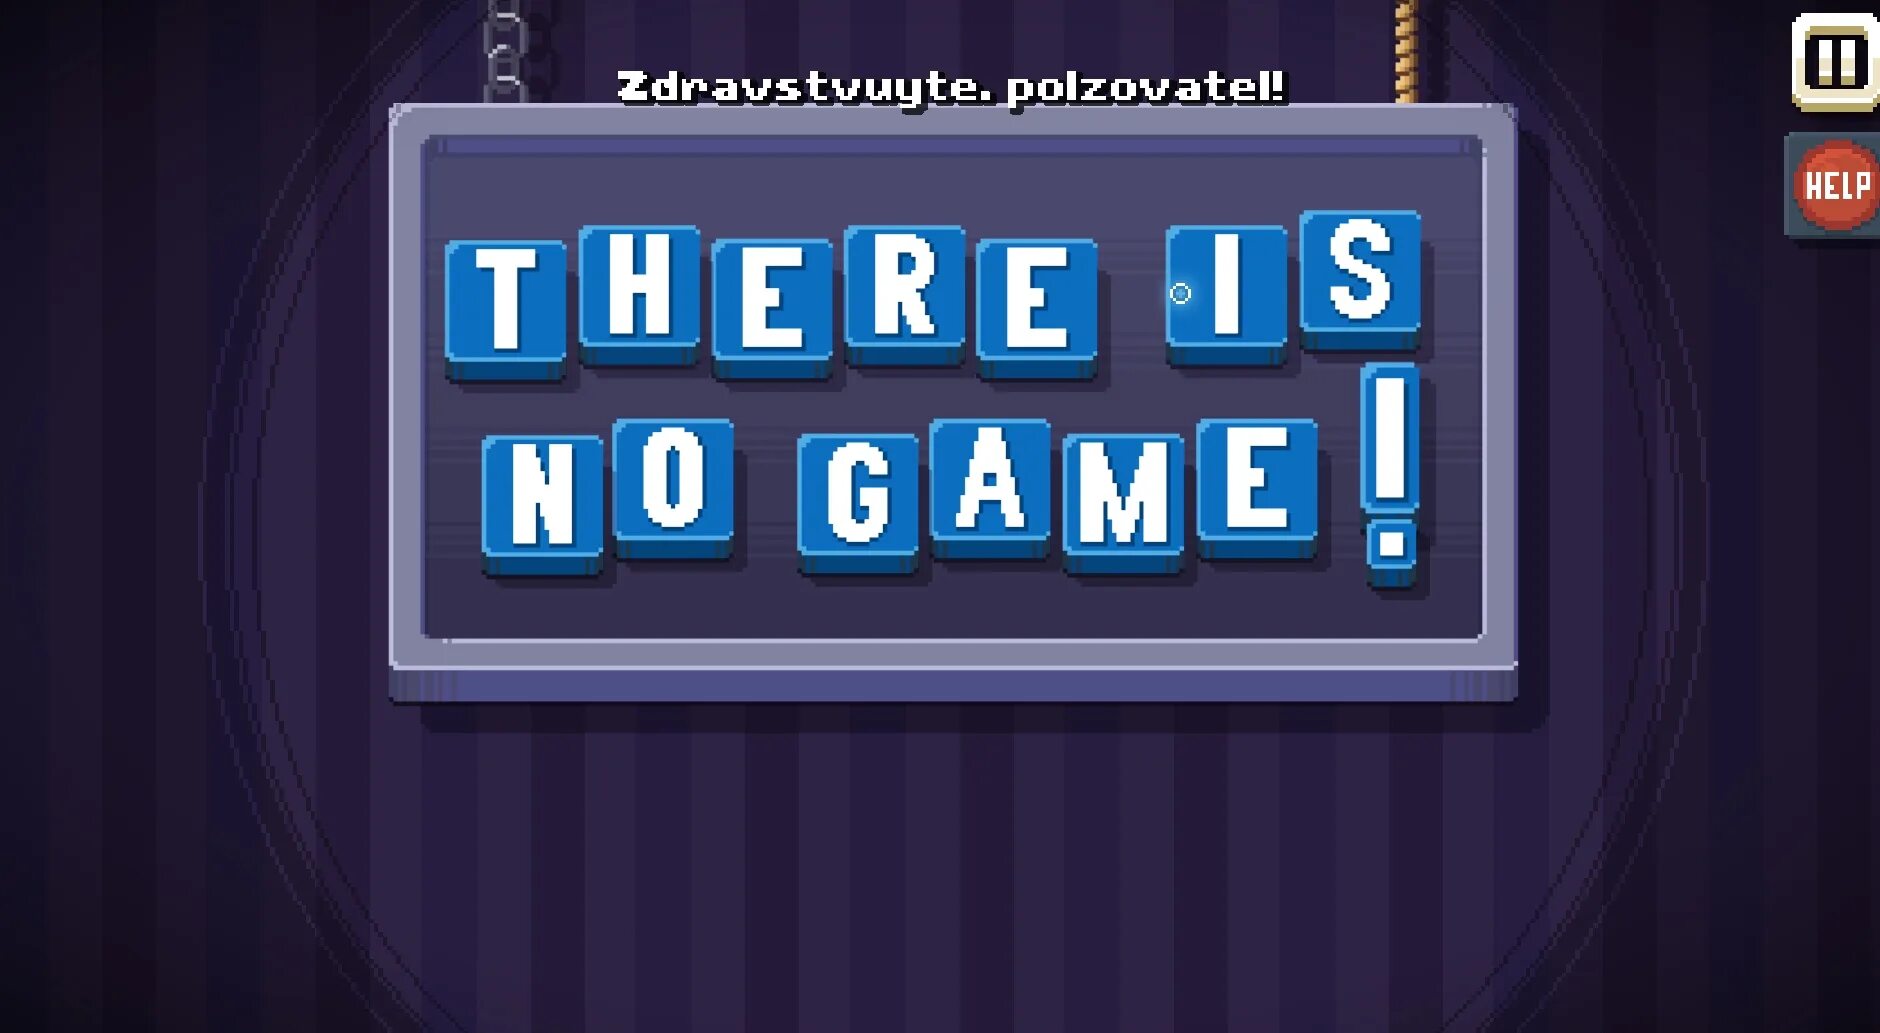 This game is being updated. There is no game. There is no game: wrong. There is игра. There's no game.